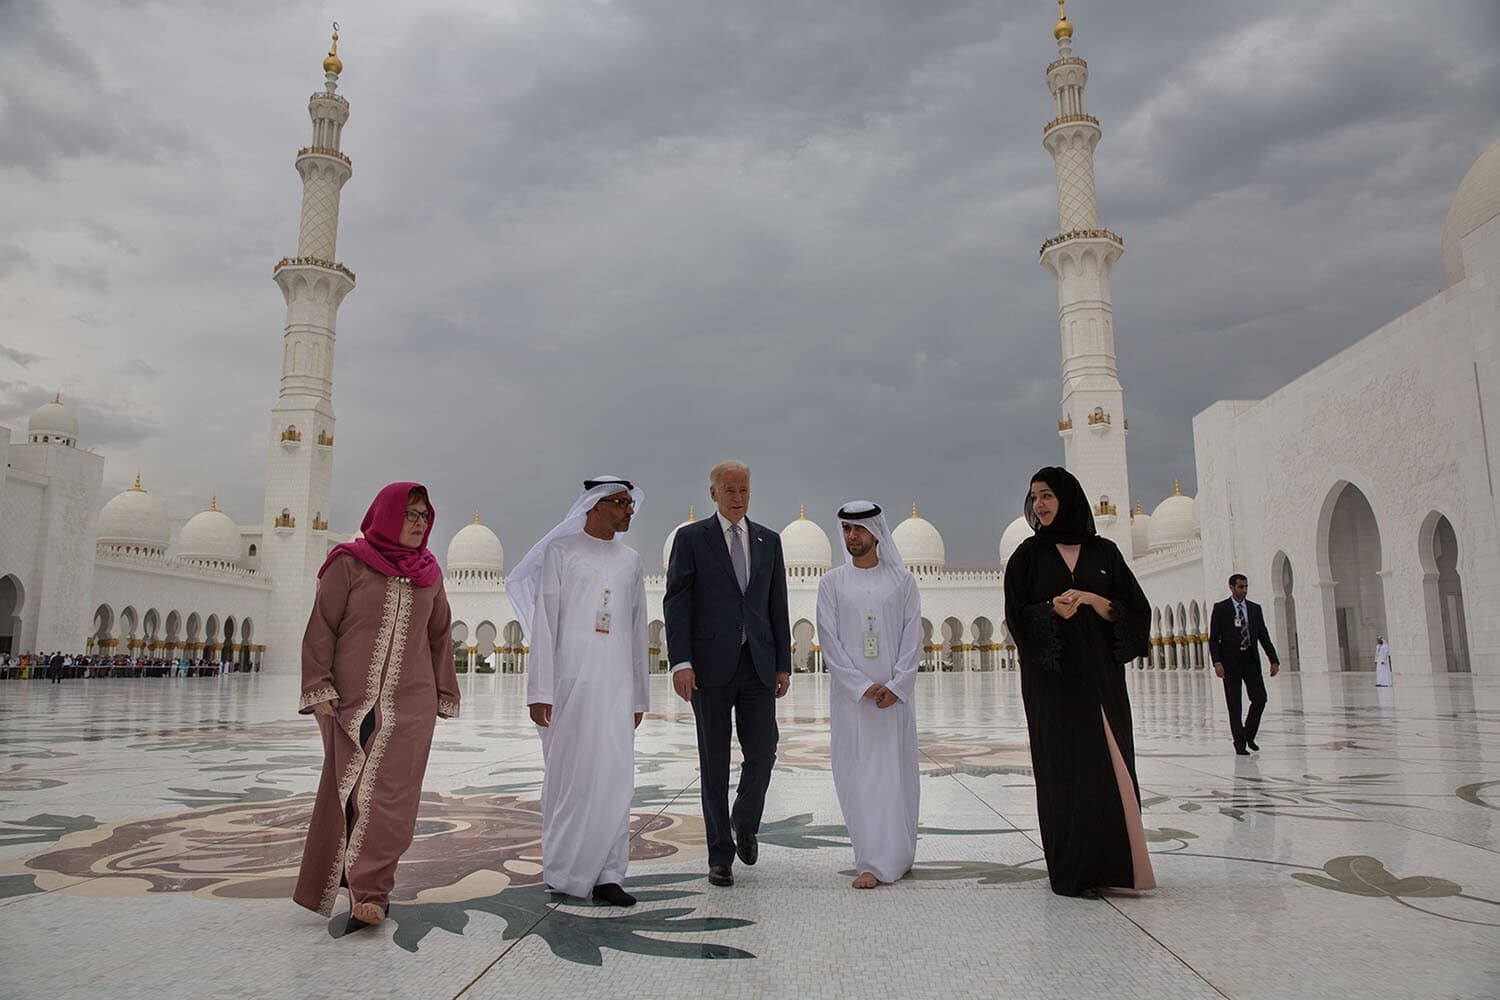 United States Vice President Joe Biden conducted a two-day visit to the UAE, which underscored the strong bilateral relationship between the two countries. During the visit, the US Vice President called the bond between the UAE and US "one of the most significant in the region" and highlighted the UAE's role in the fight against ISIL and extremism. 